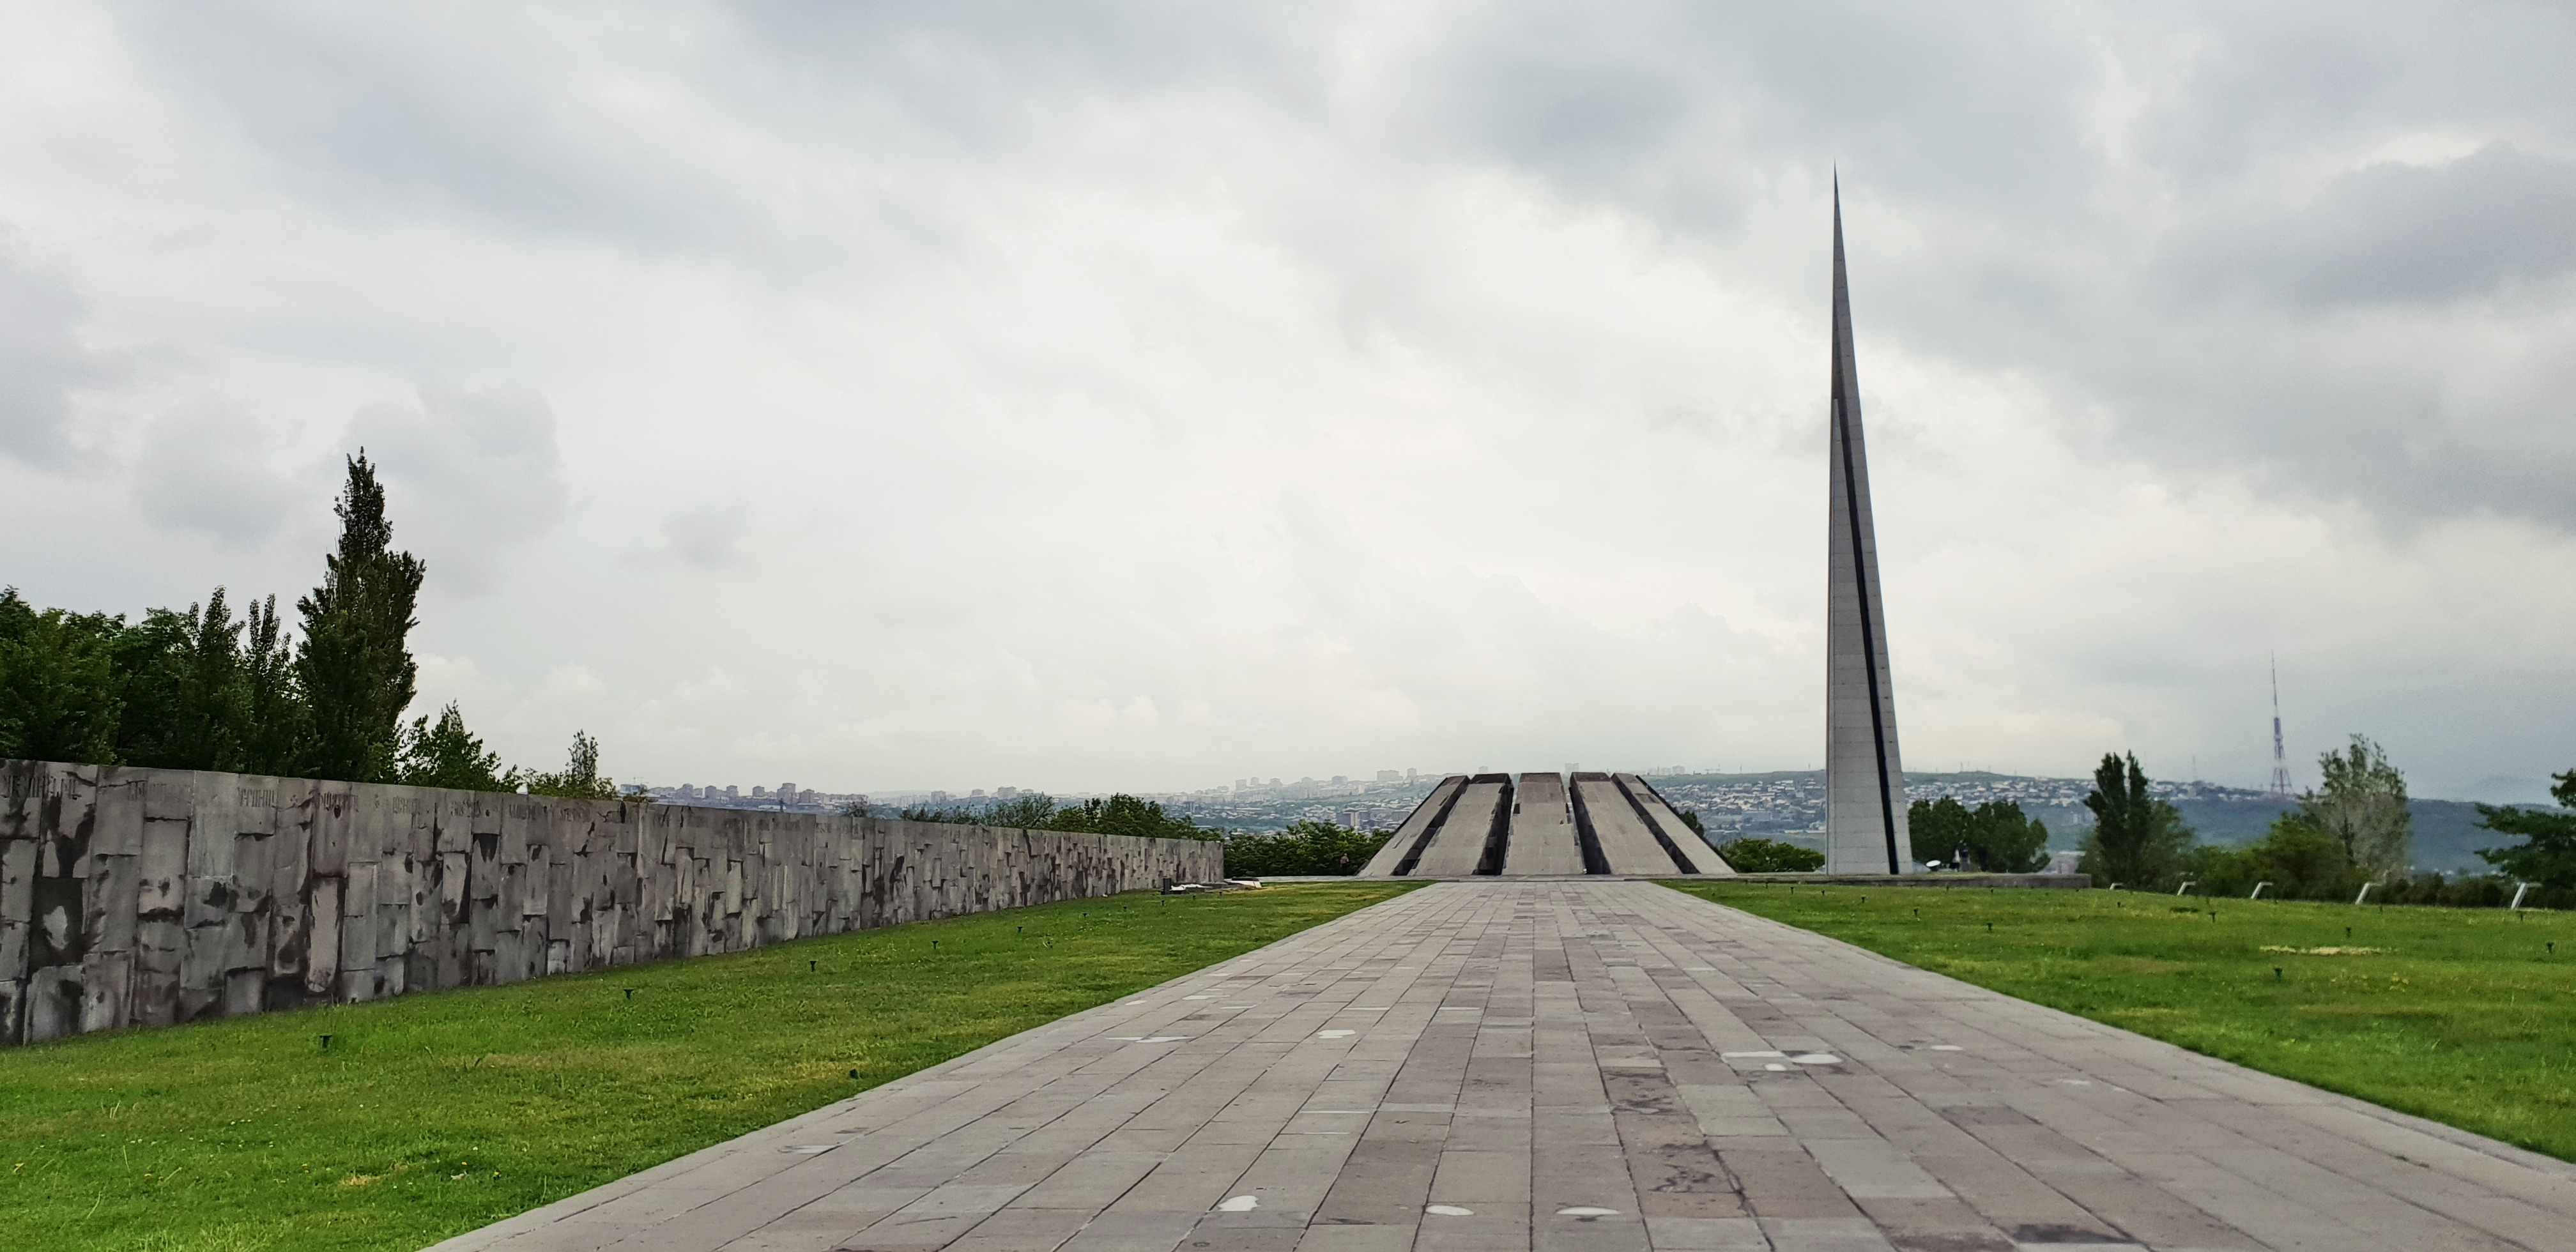 The memorial was built to commemorate the Armenians killed during the genocide